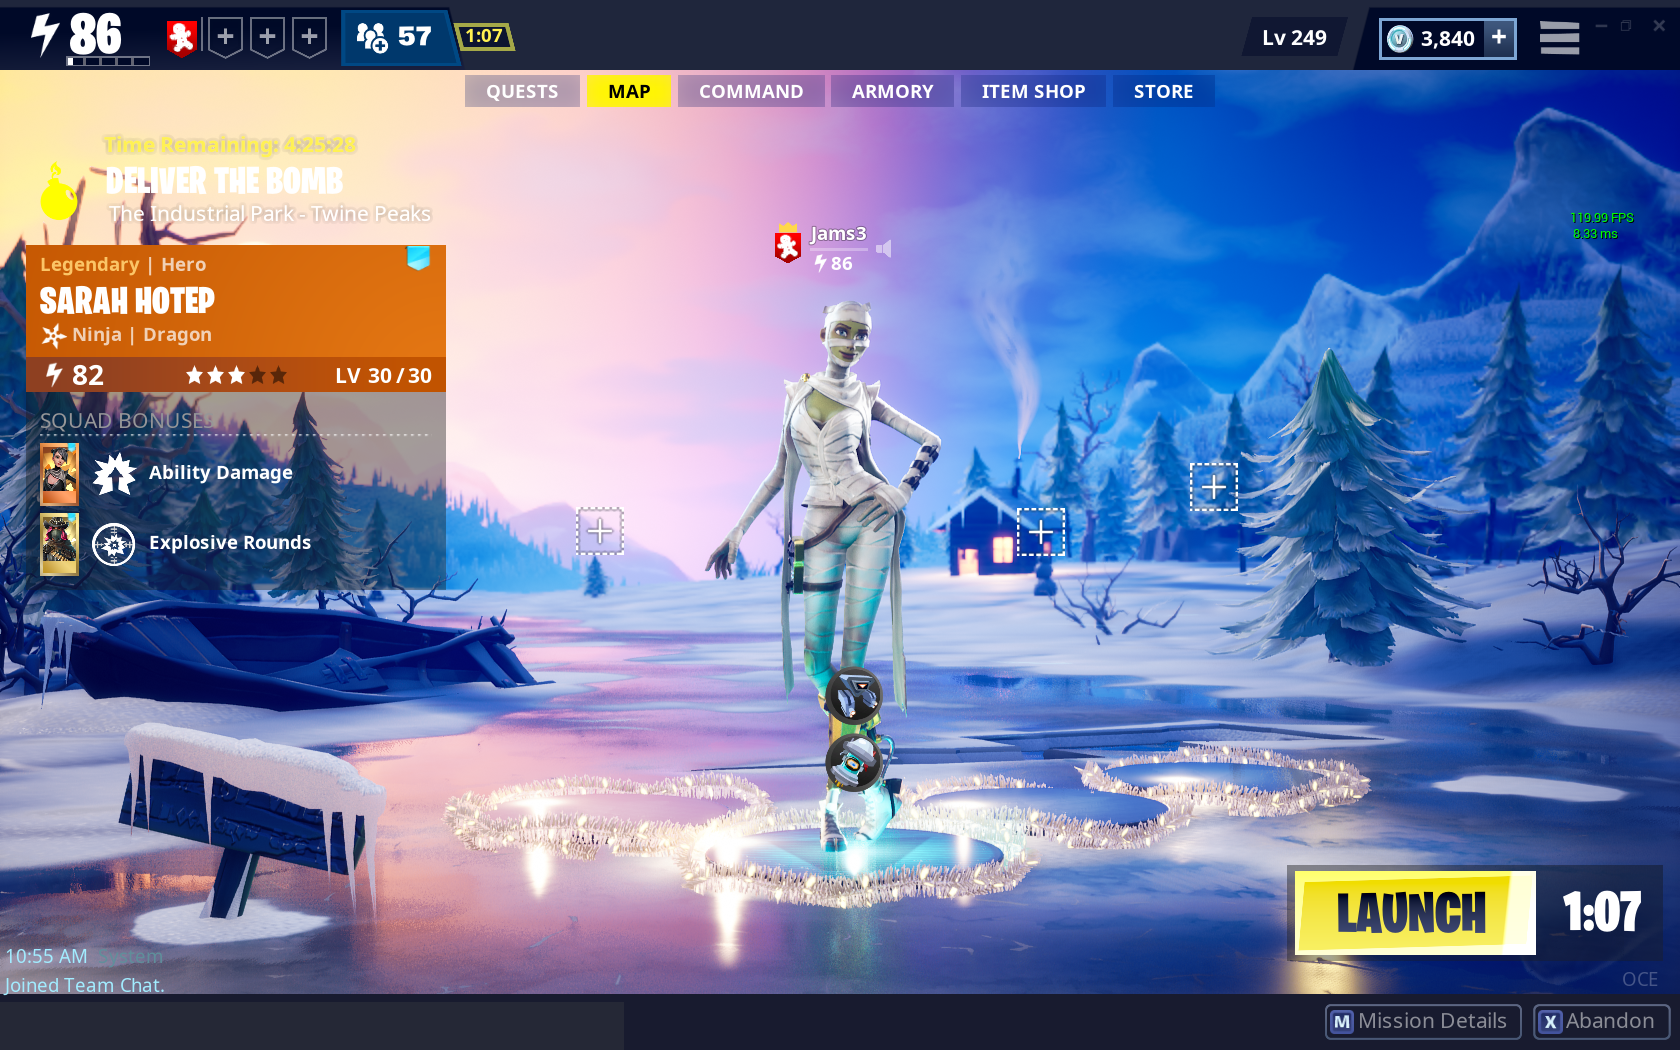 I found how to make the lobby background look without the fog. (How to do it in the comments)